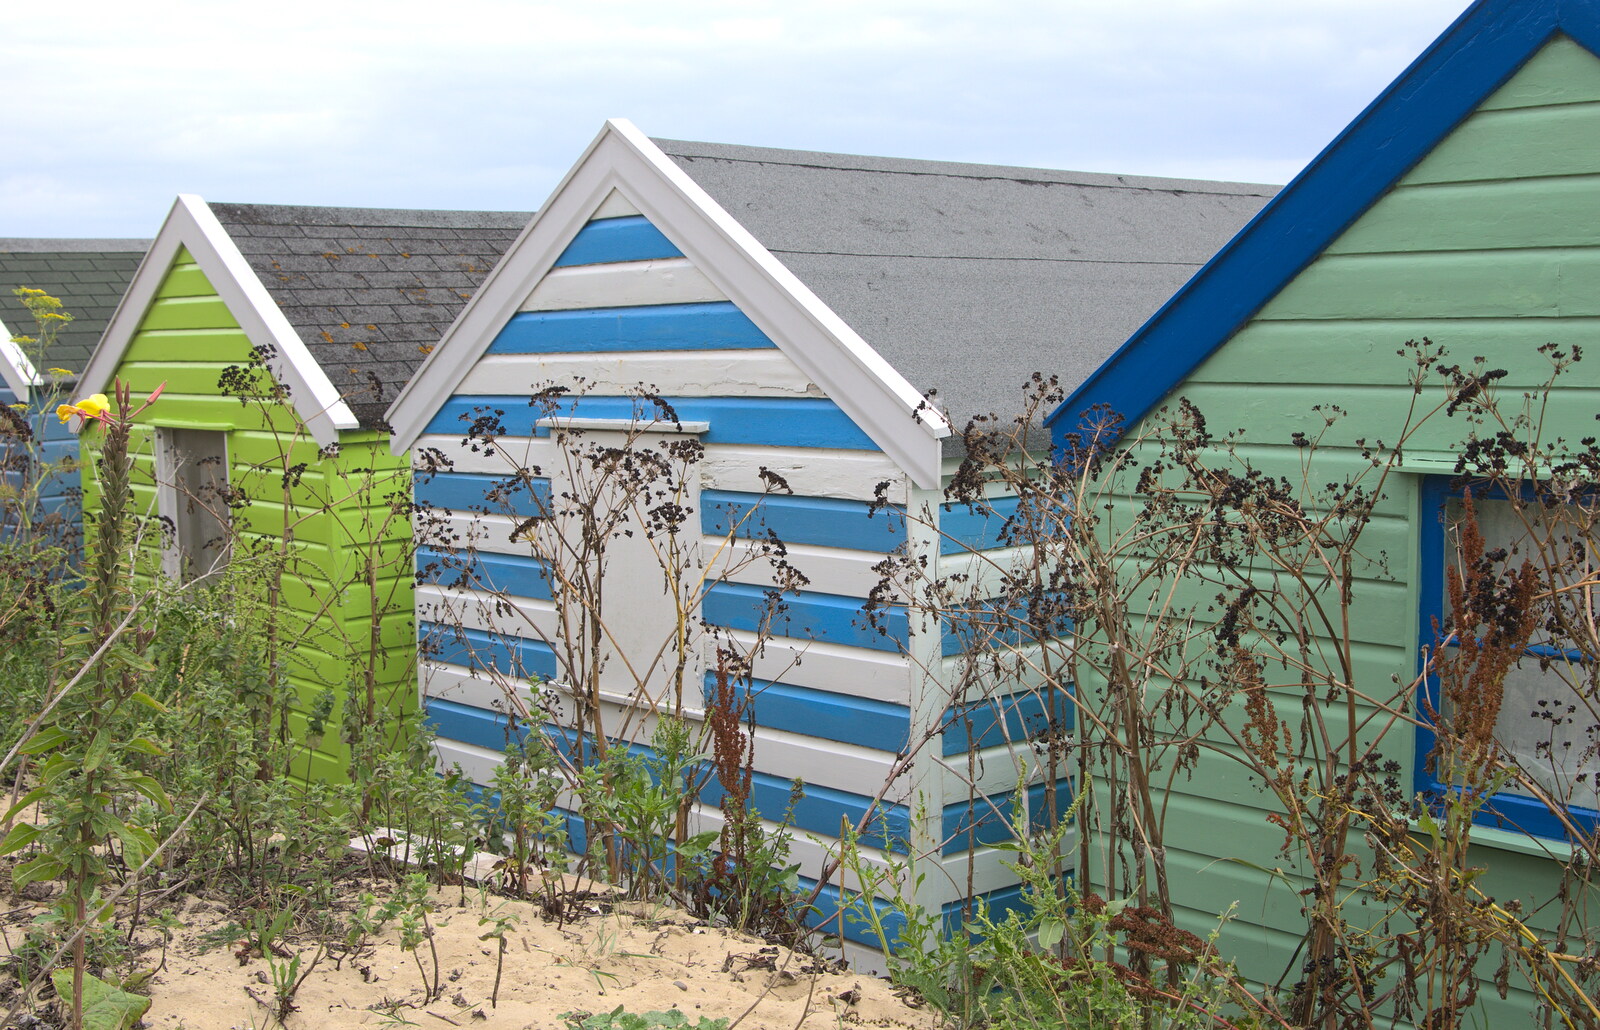 Stripey beach hut from The Danger of Trees: A Camping (Mis)adventure - Southwold, Suffolk - 3rd August 2015